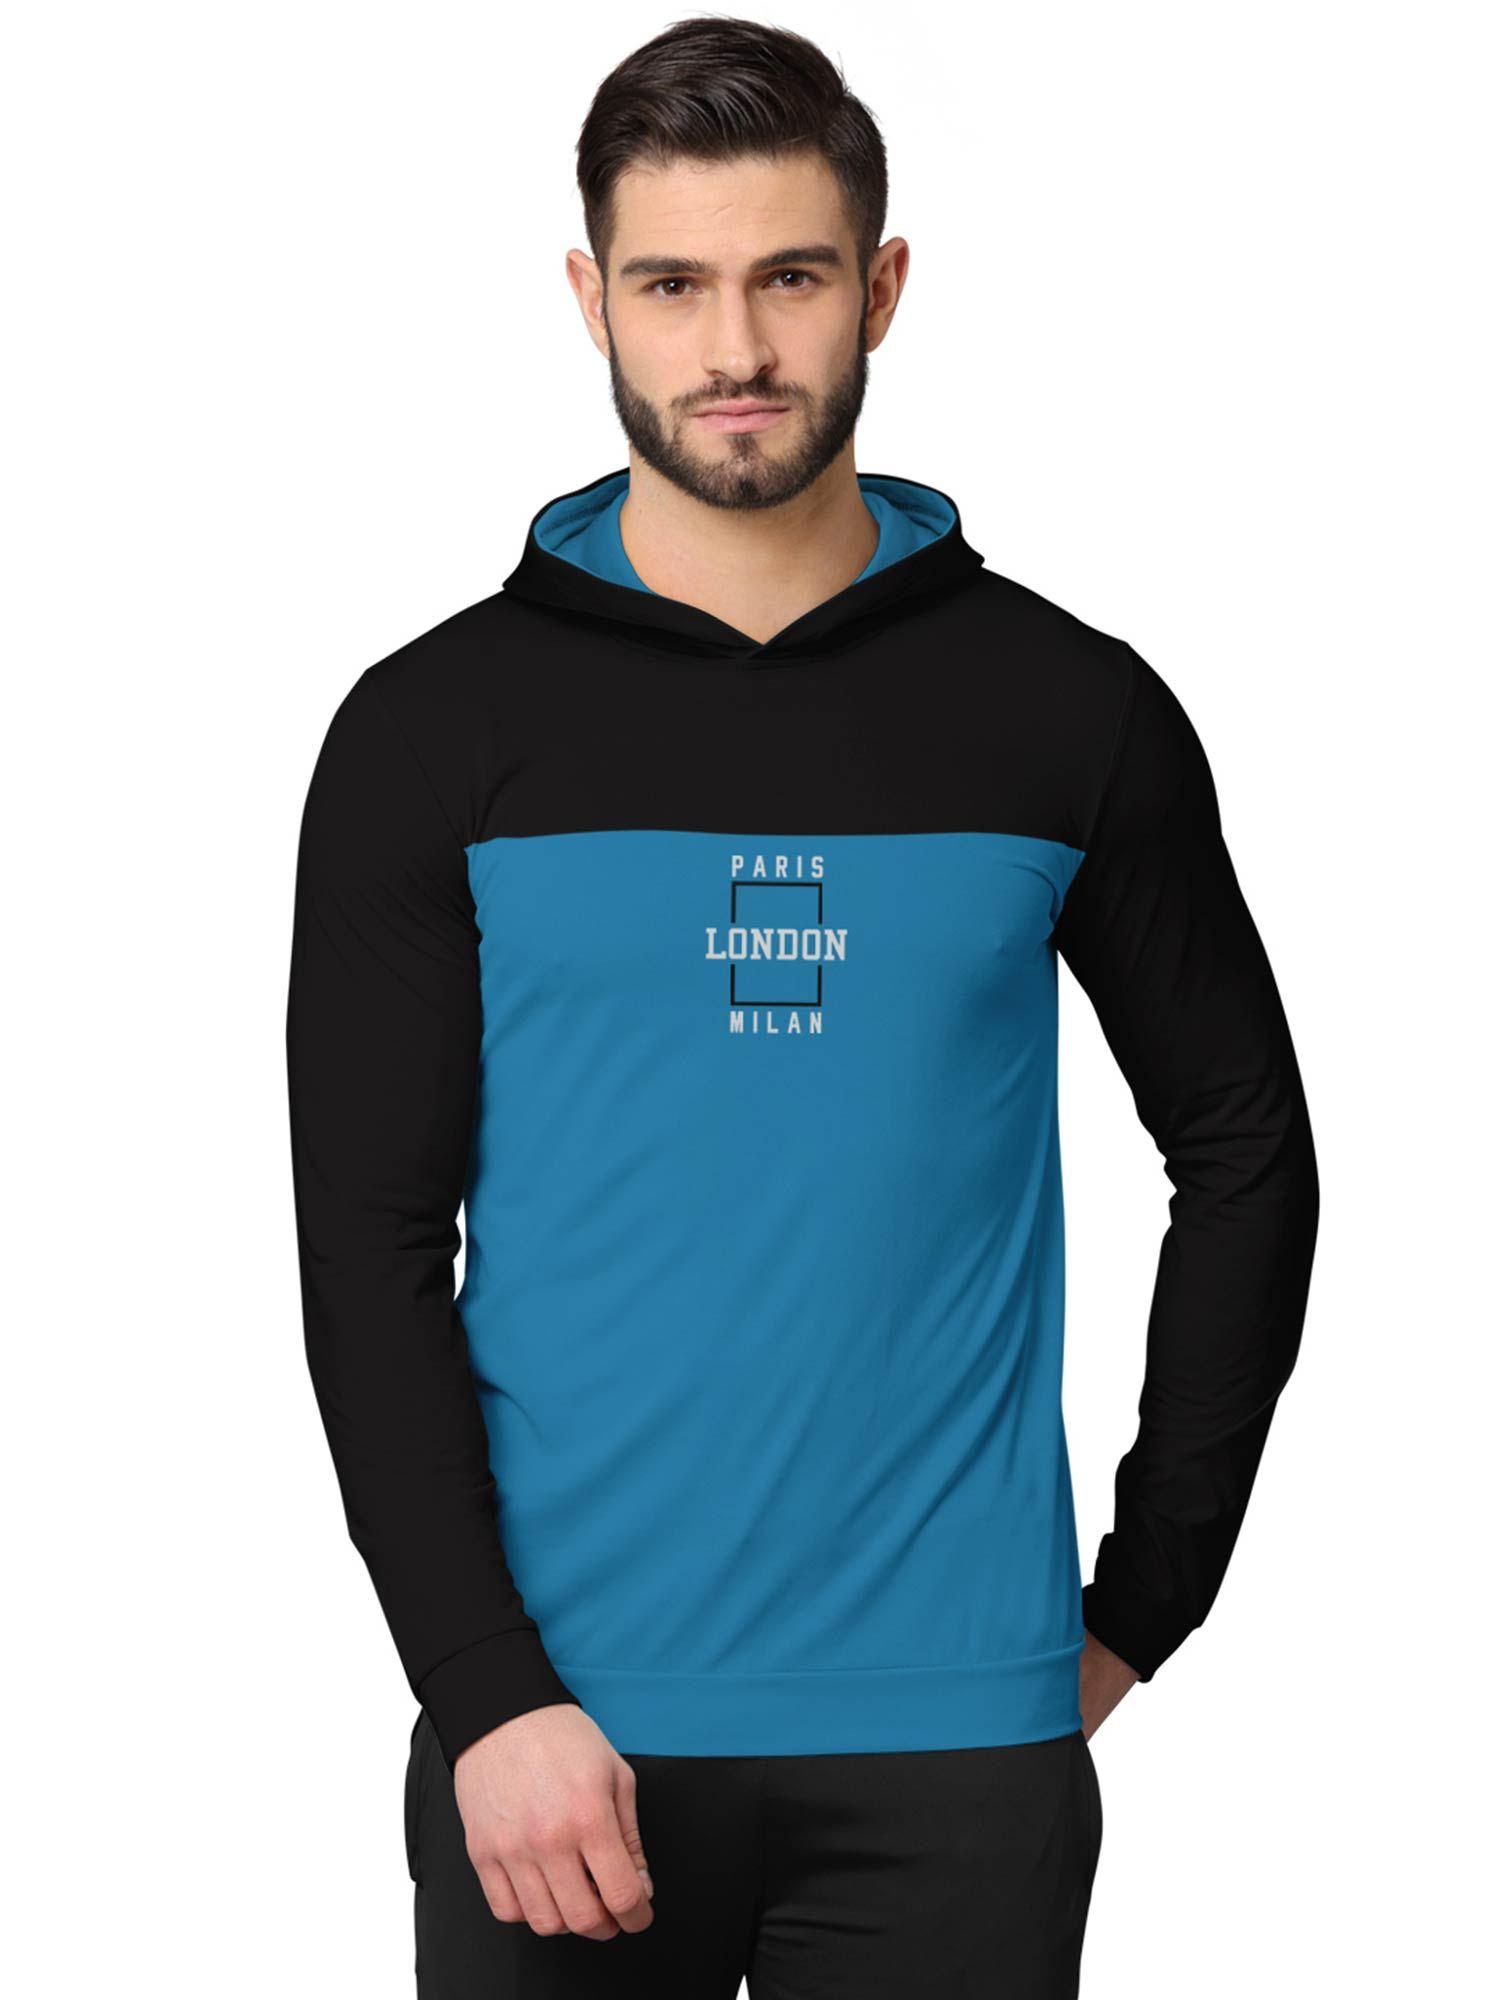 colorblock-full-sleeve-hooded-sweatshirts-for-men-black-and-blue